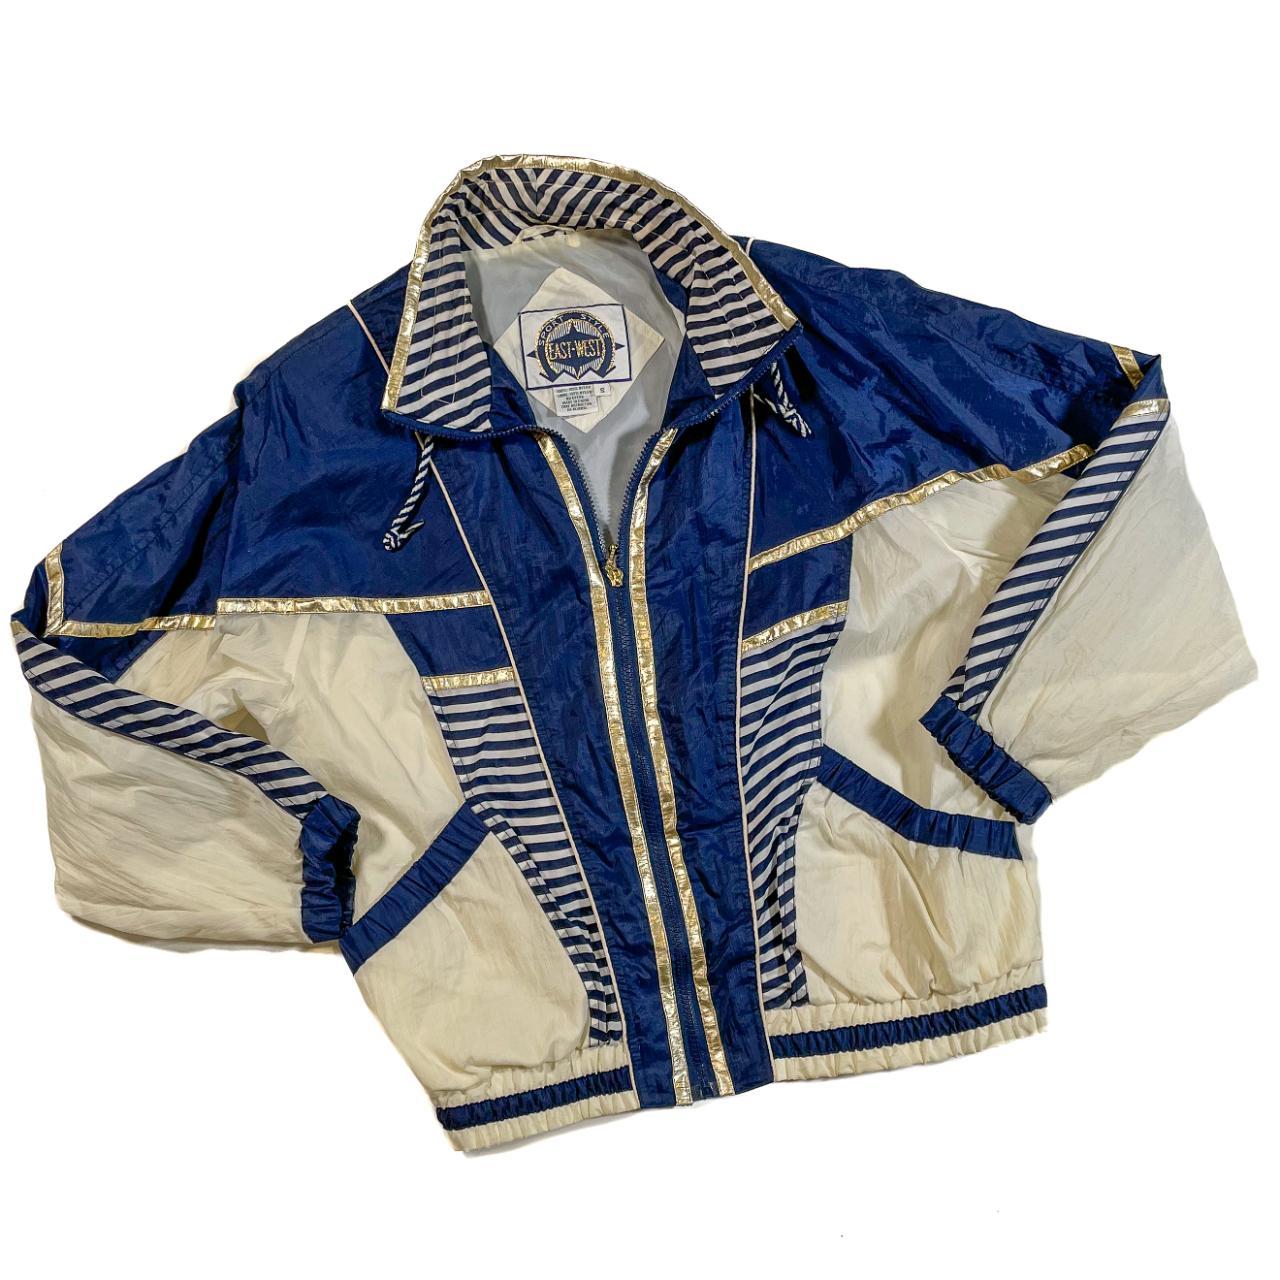 East West Women's Navy and Gold Jacket